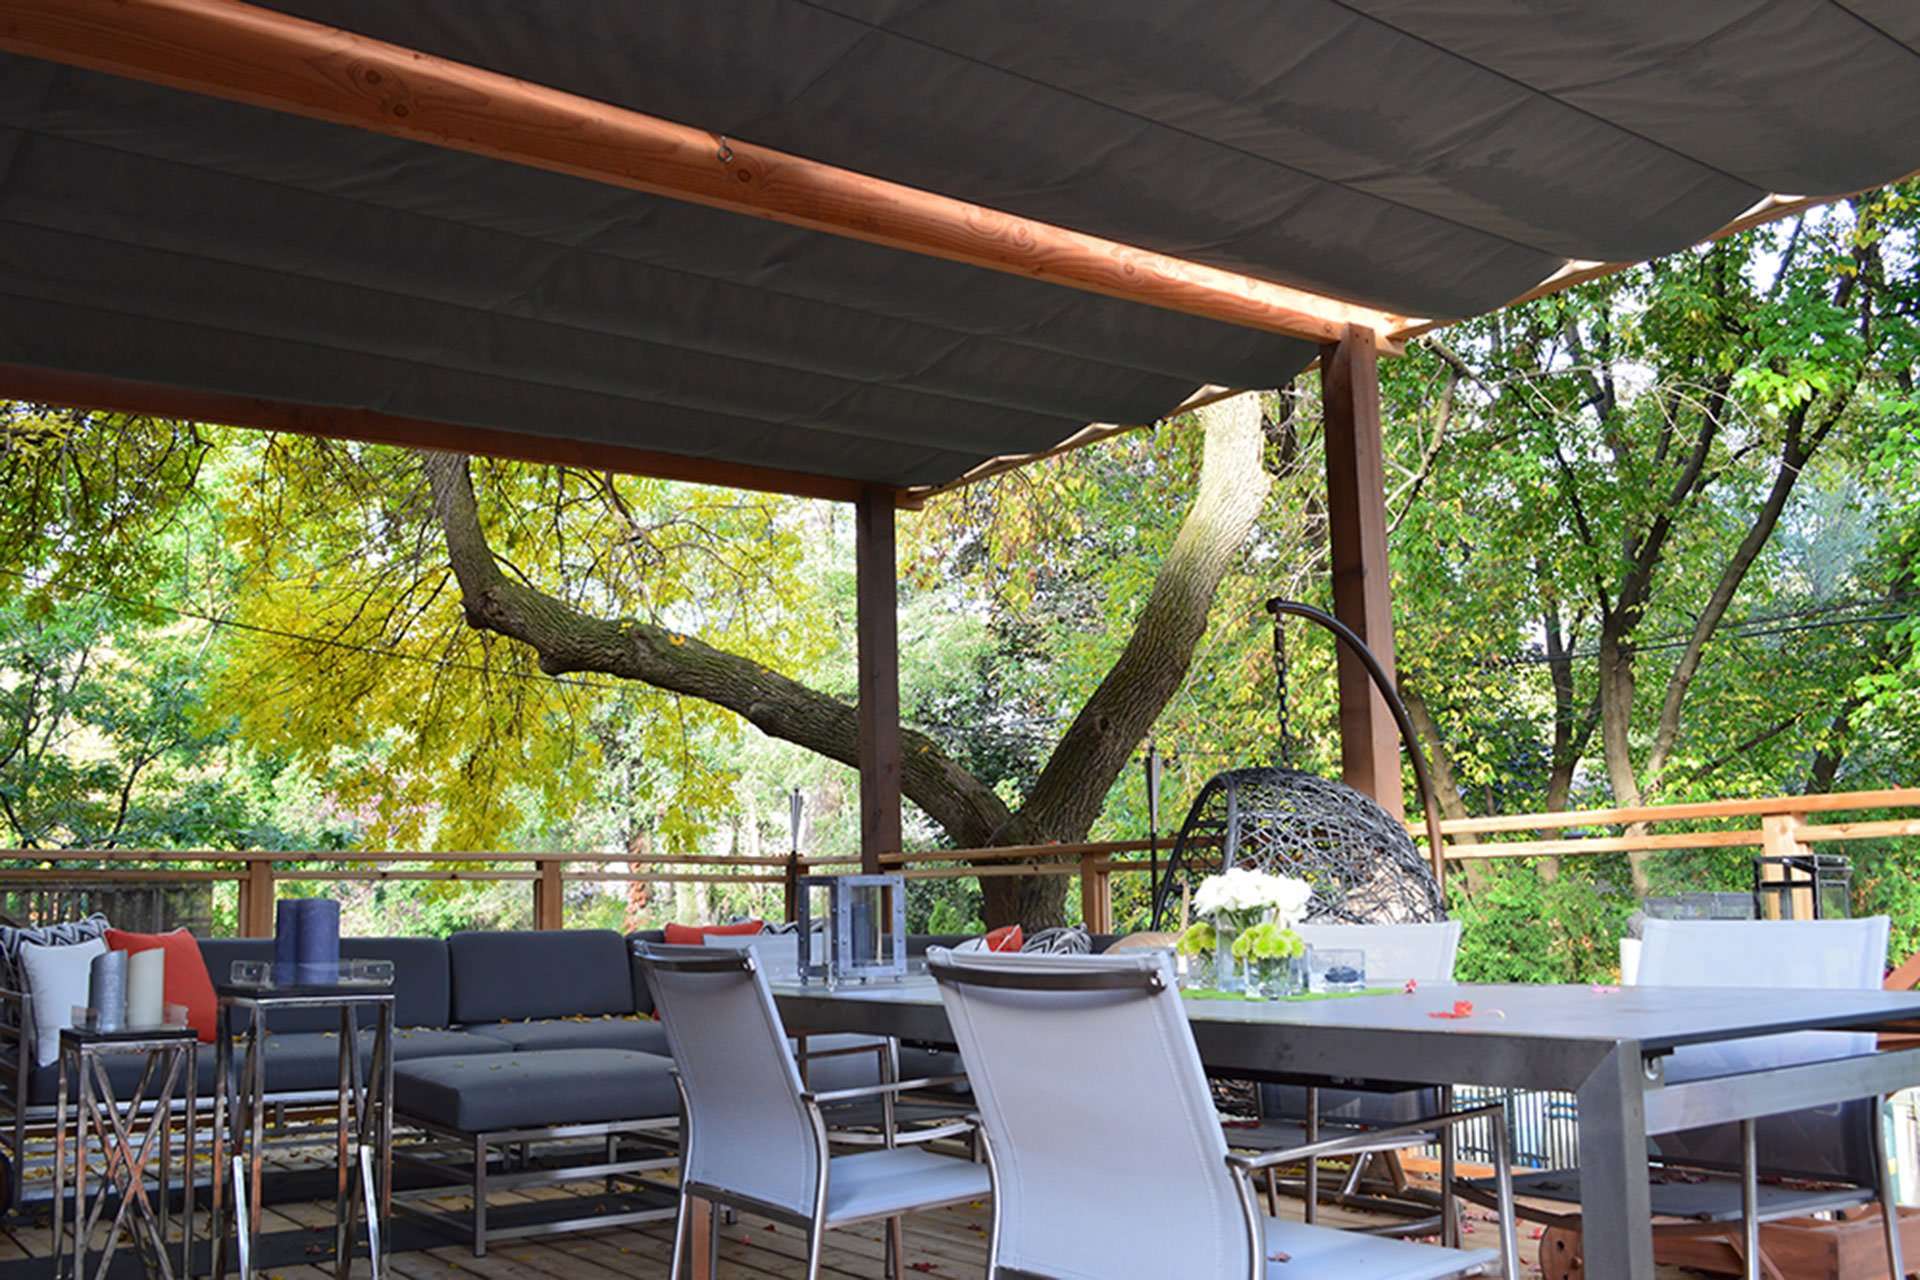 Keep Cool with These Five Patio Shade Ideas